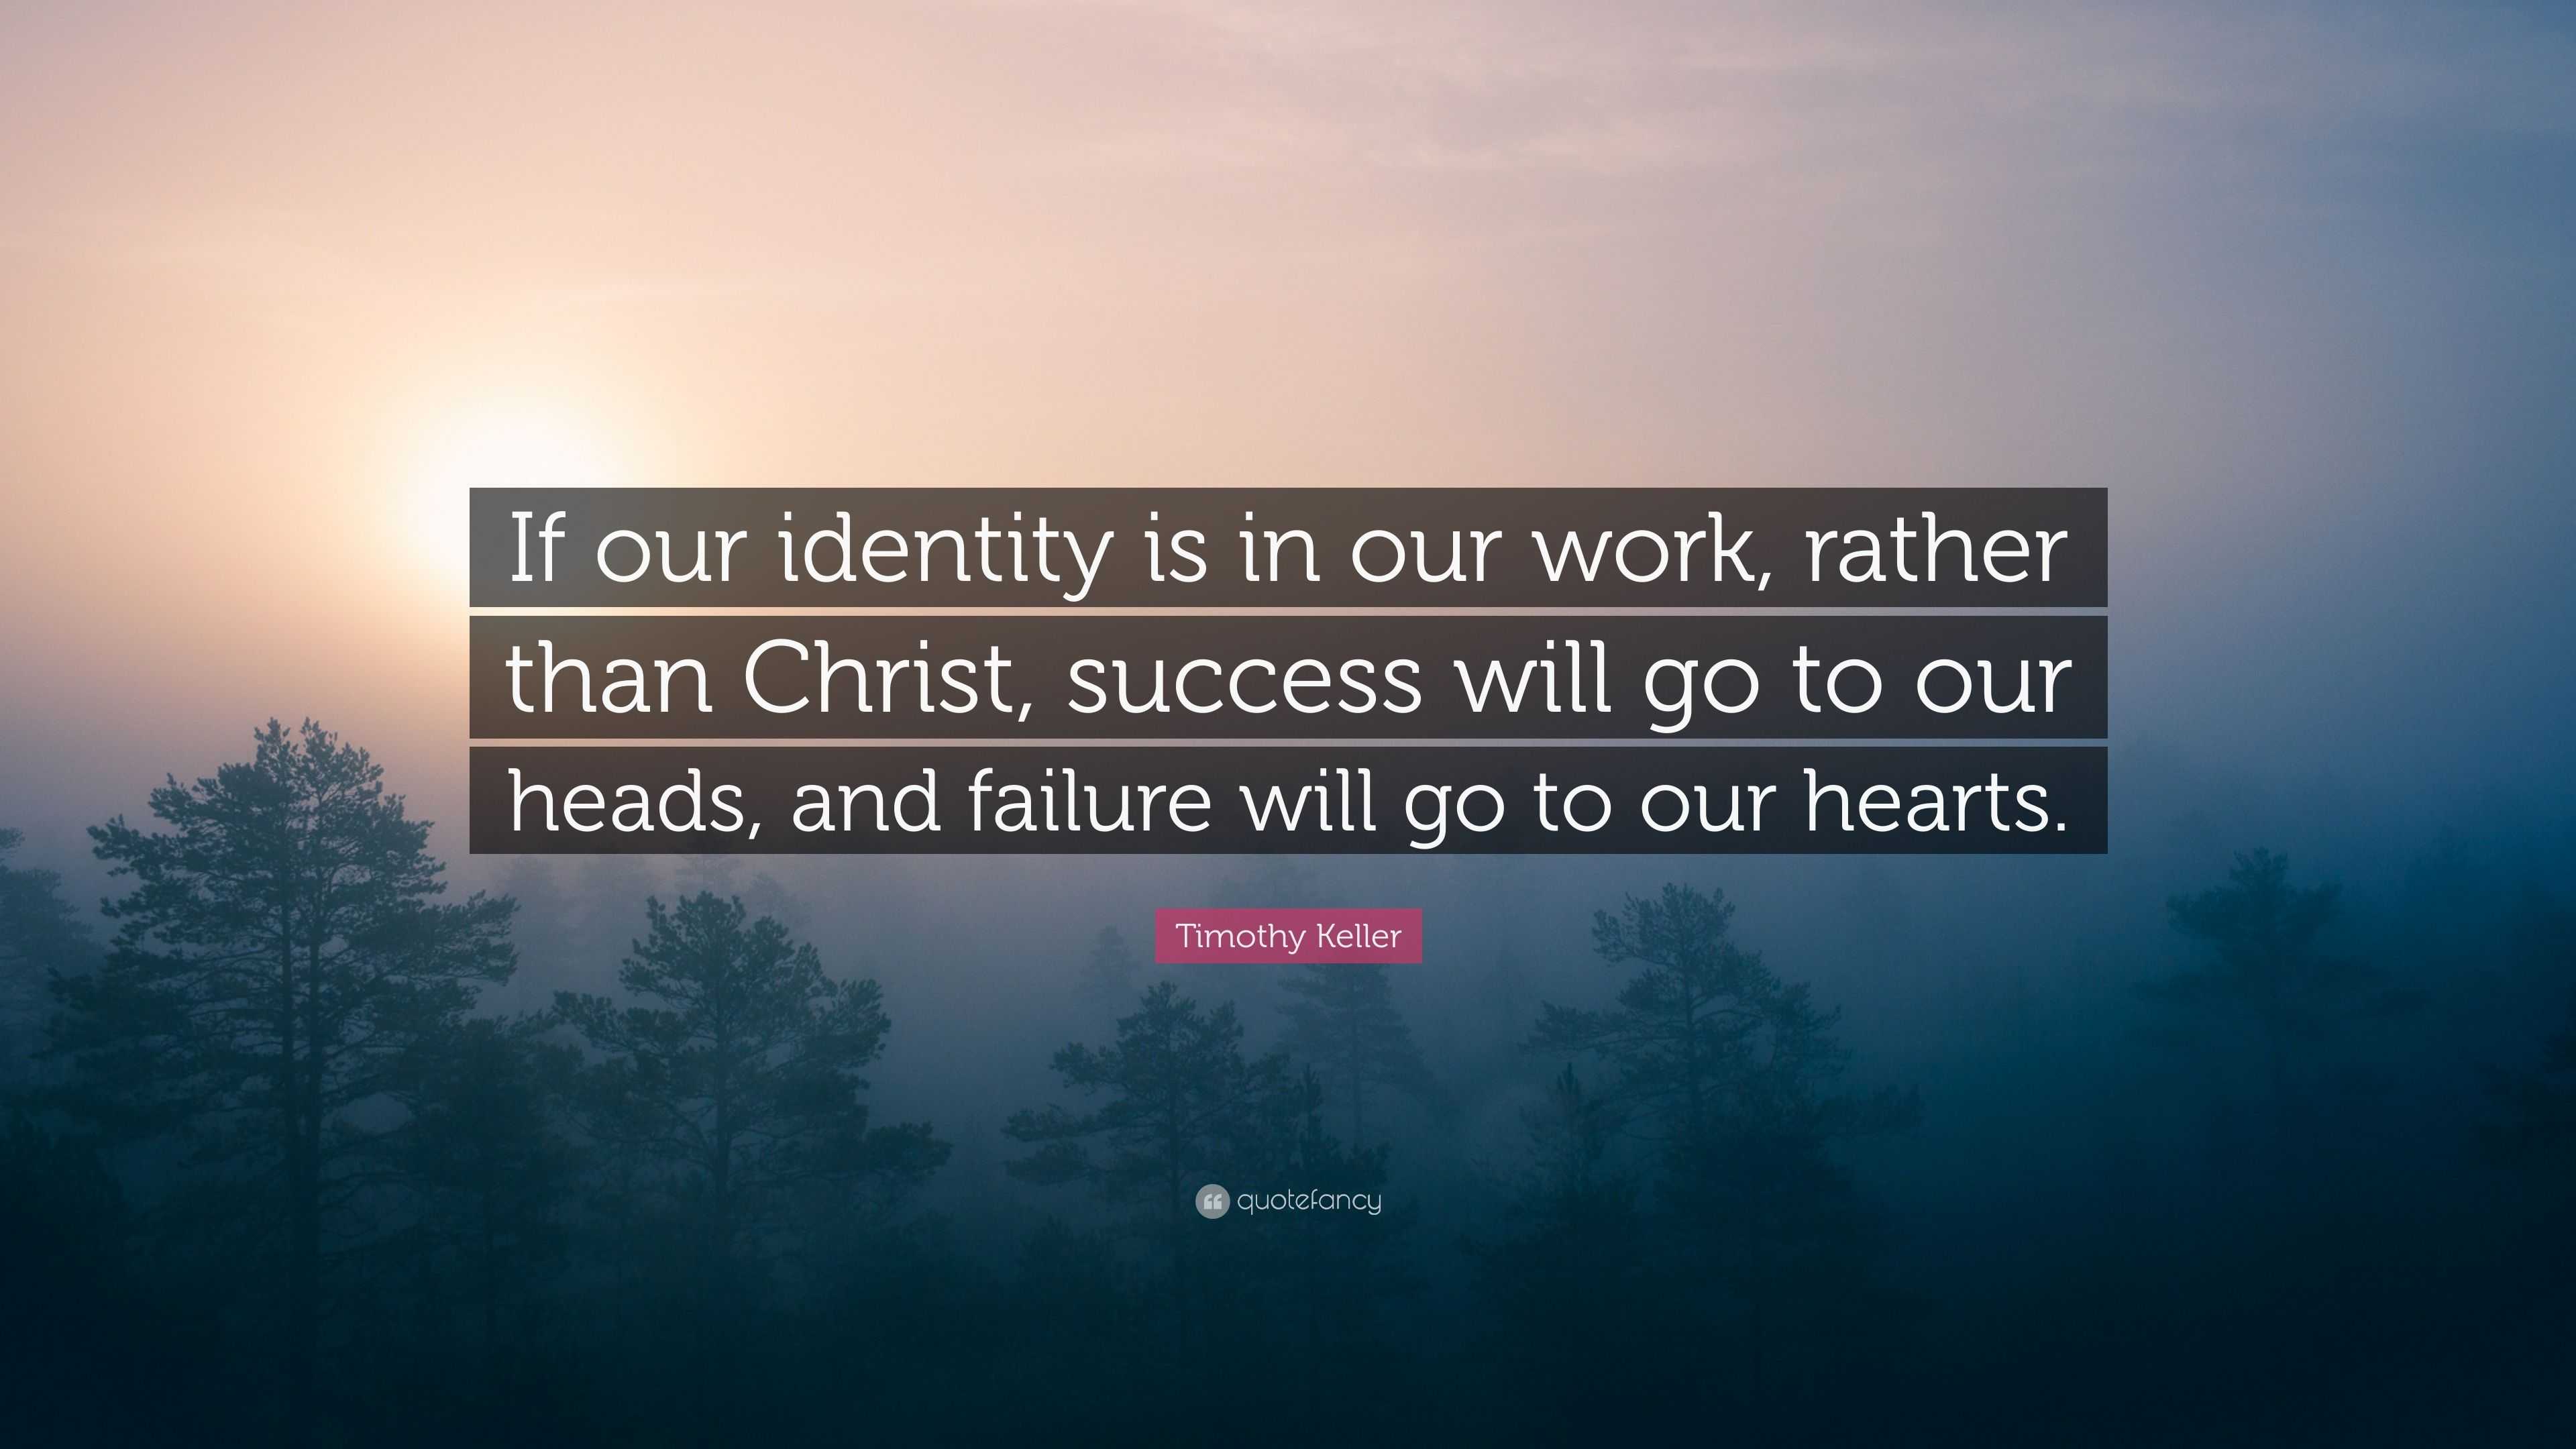 Timothy Keller Quote: “If our identity is in our work, rather than